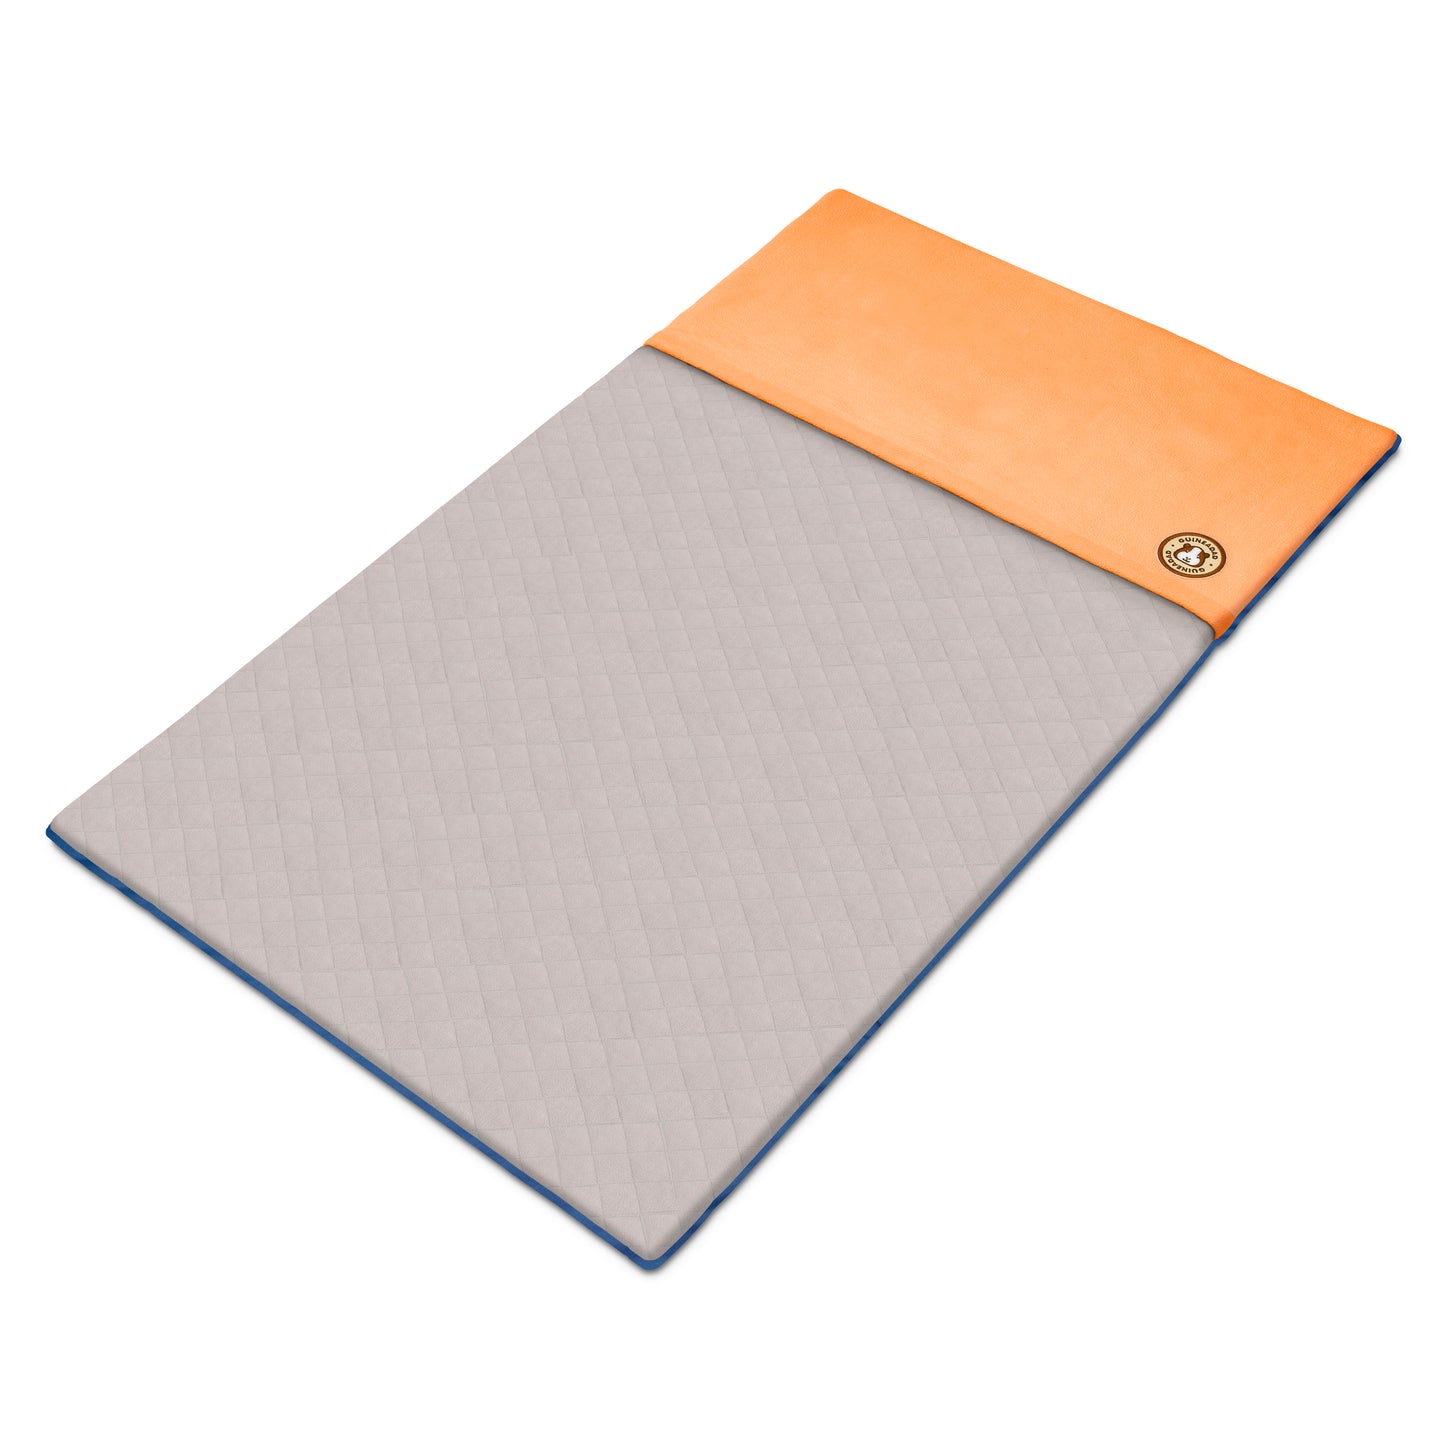 A GuineaDad Original Liner with a Orange pocket, offering a snug and stylish space for guinea pigs. Its eco-friendly, absorbent fabric ensures easy care and a healthy habitat​